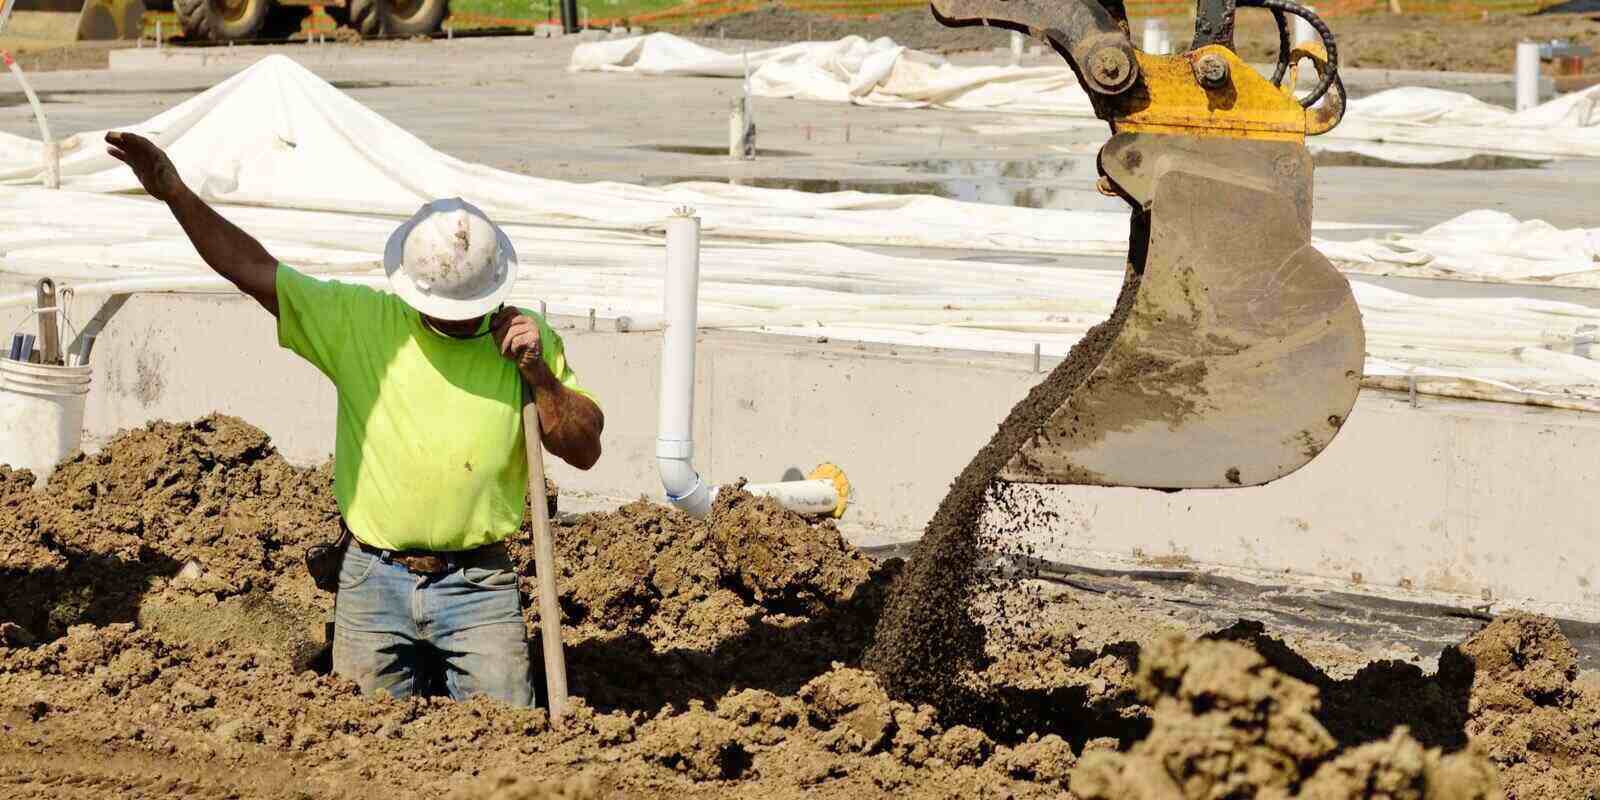 contractor using a small track hoe excavator to dig a water line trench for water treatment construction